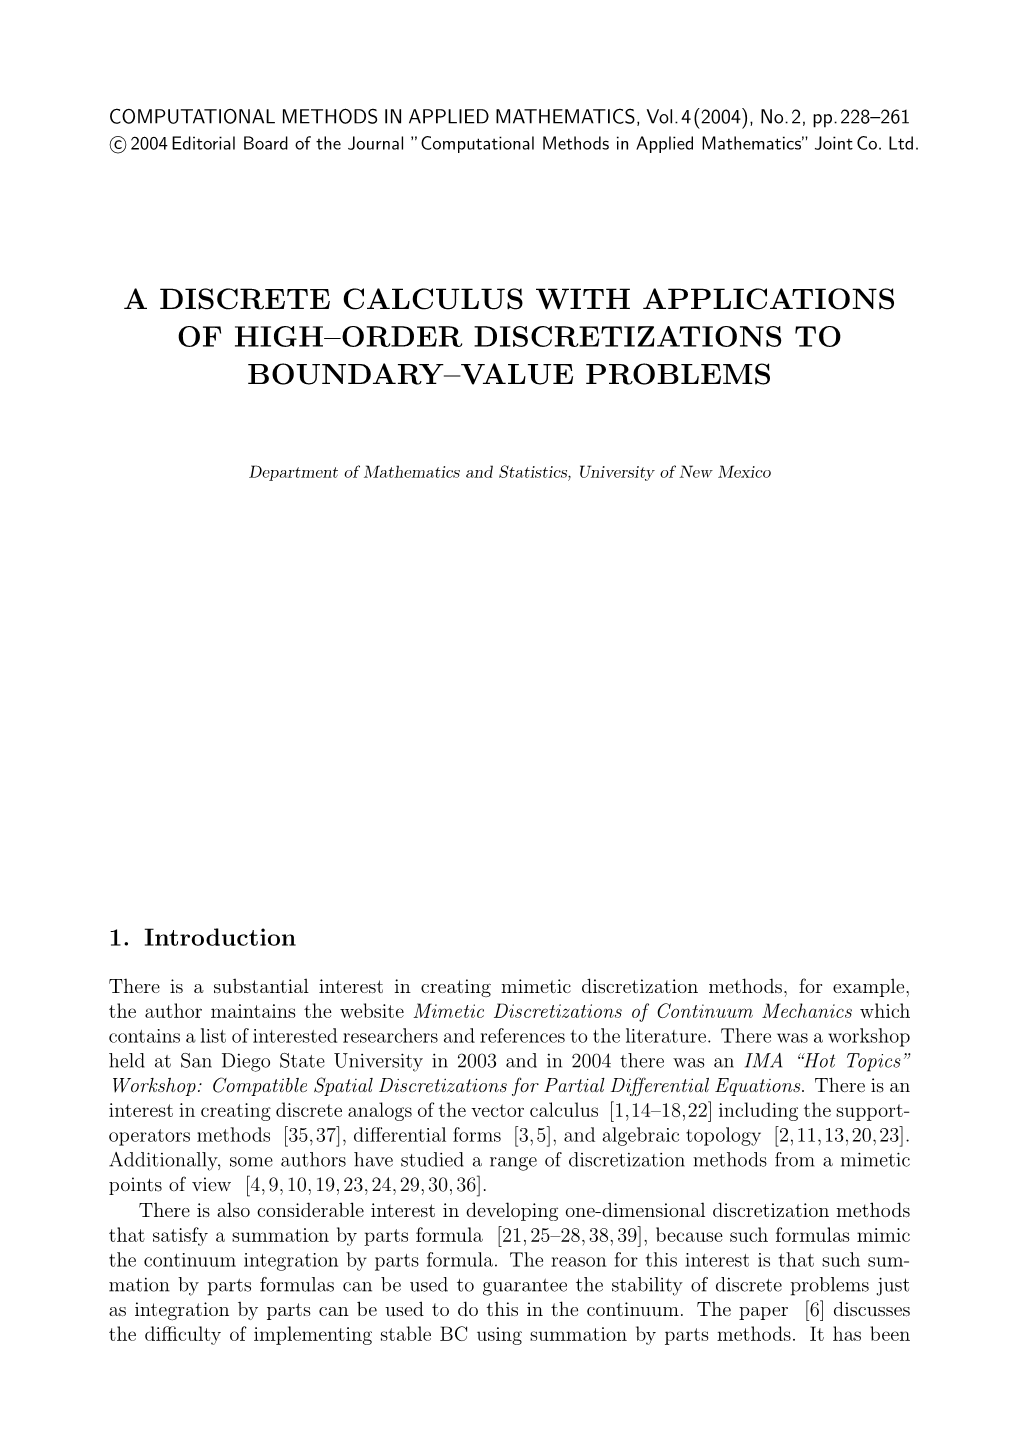 A Discrete Calculus with Applications of High–Order Discretizations to Boundary–Value Problems